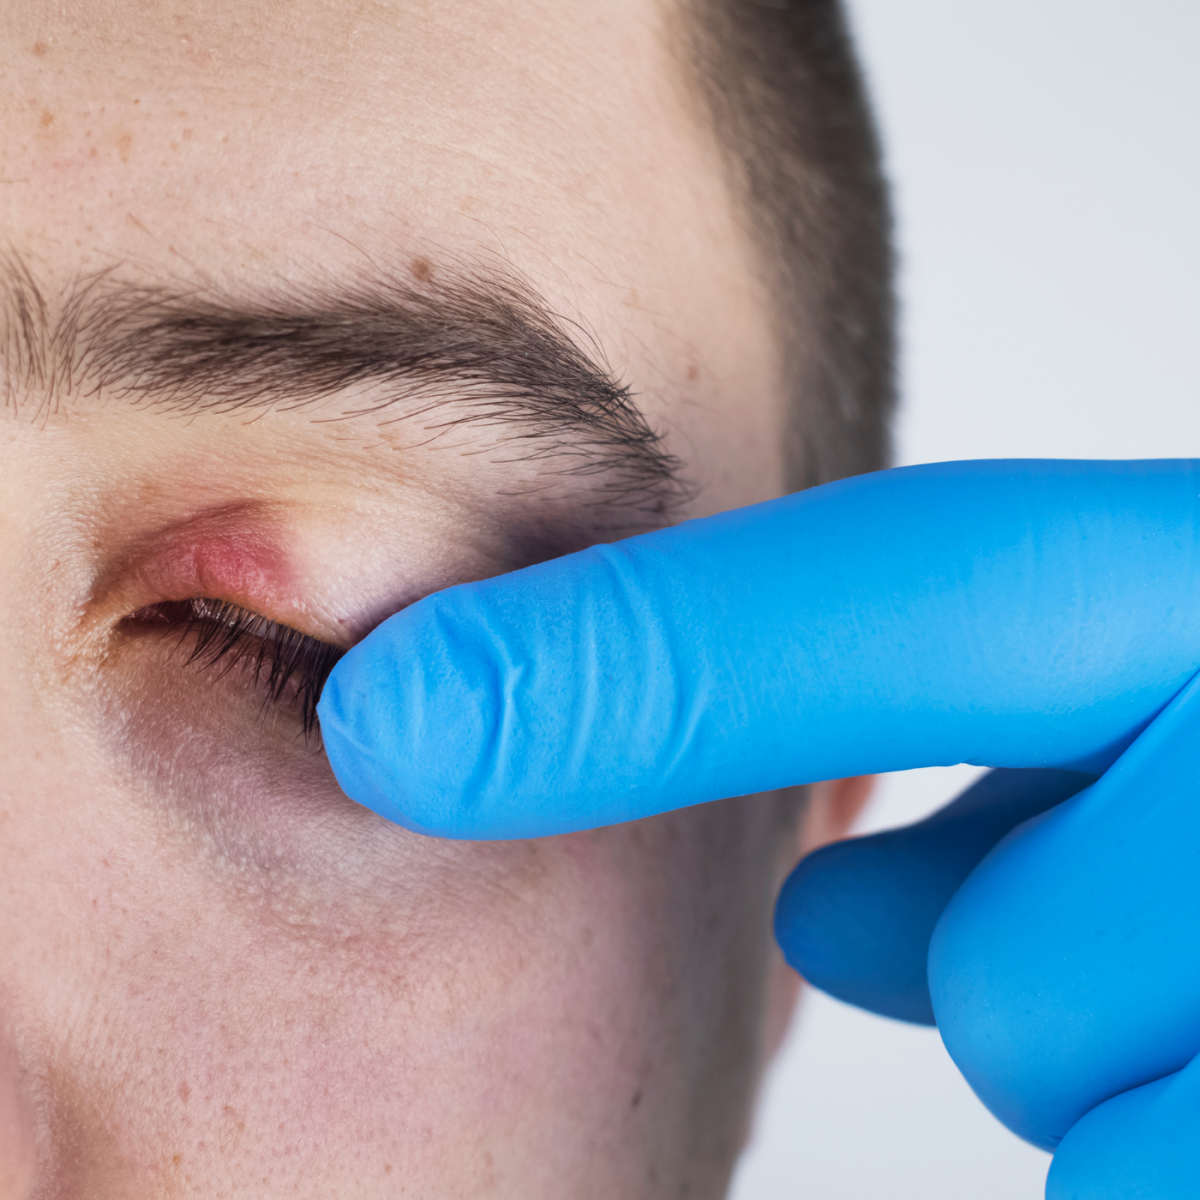 Here are some tips to help relieve your eyelid discomfort. 